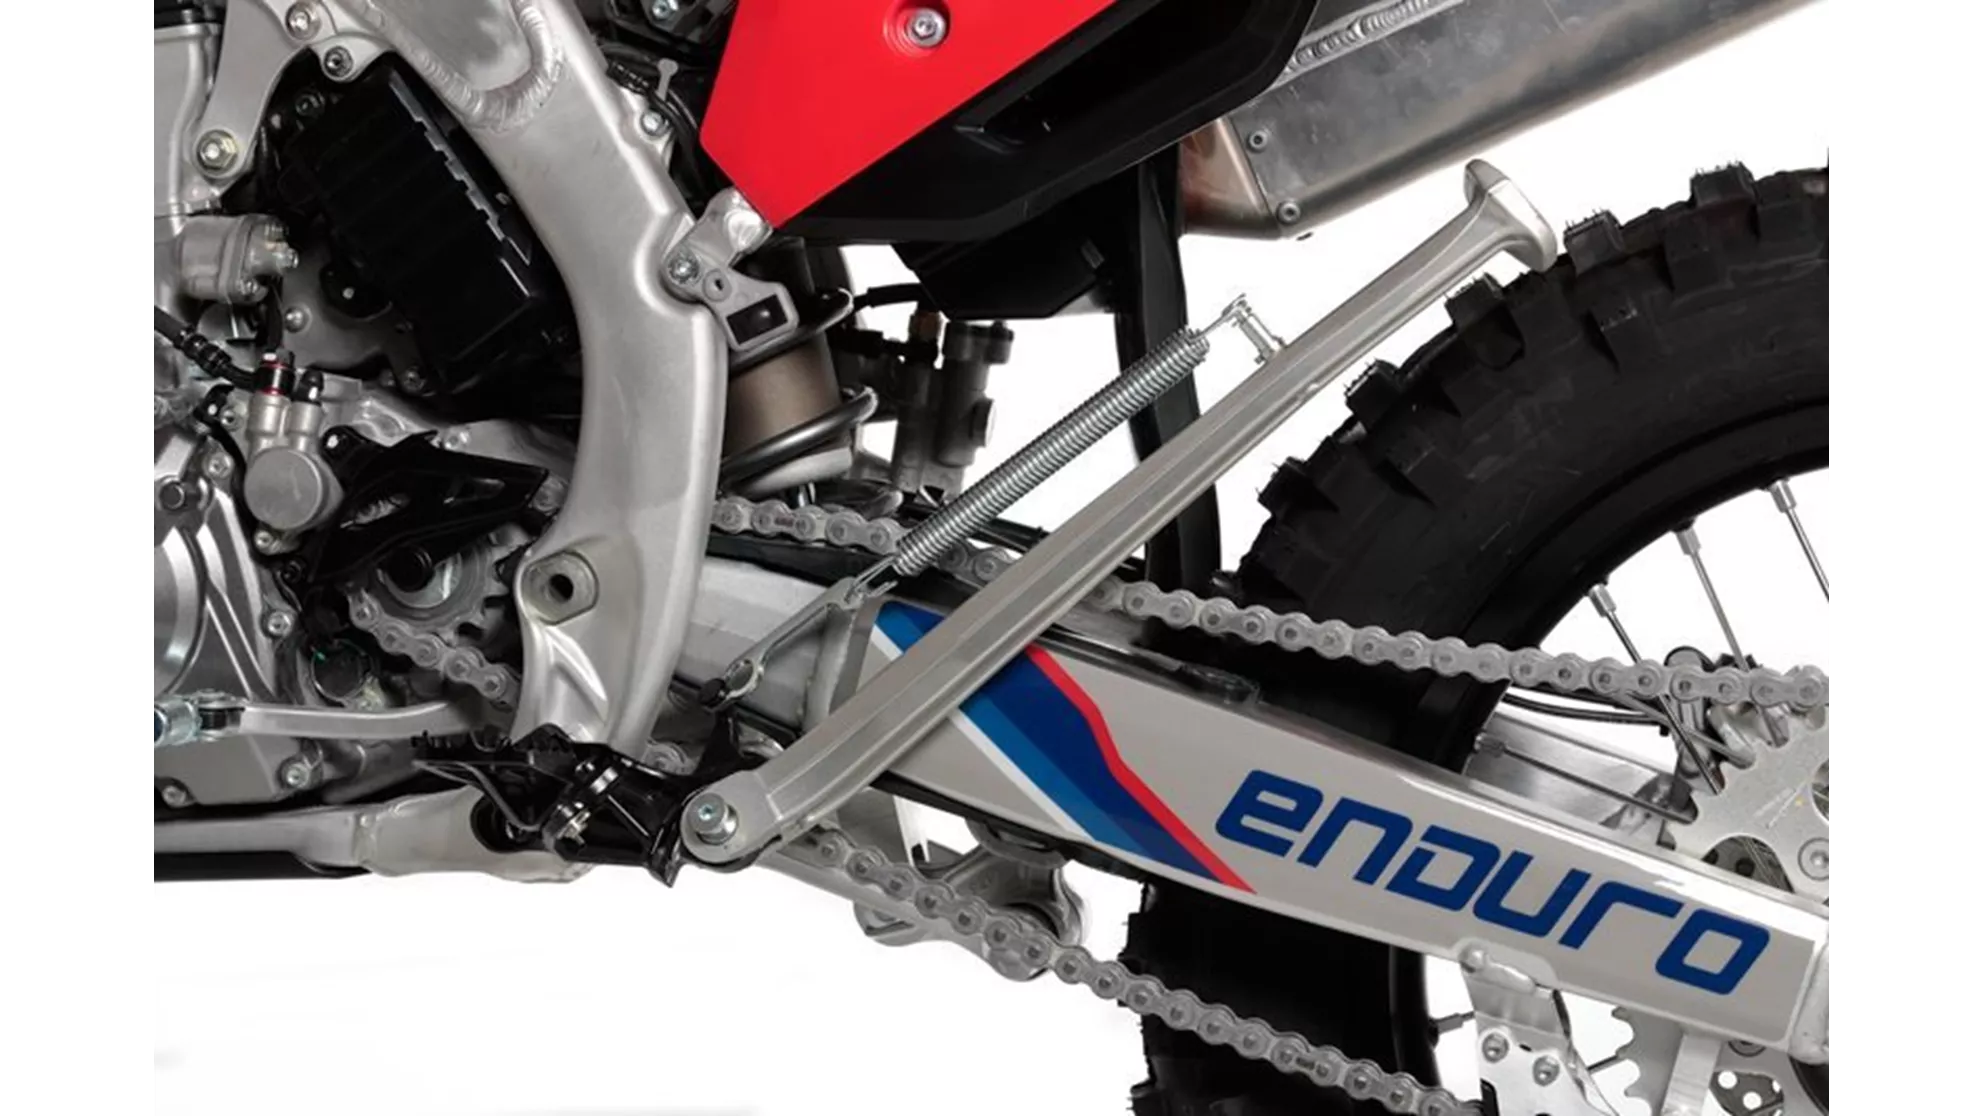 Red Moto CRF 450RX Enduro Special - Image 17